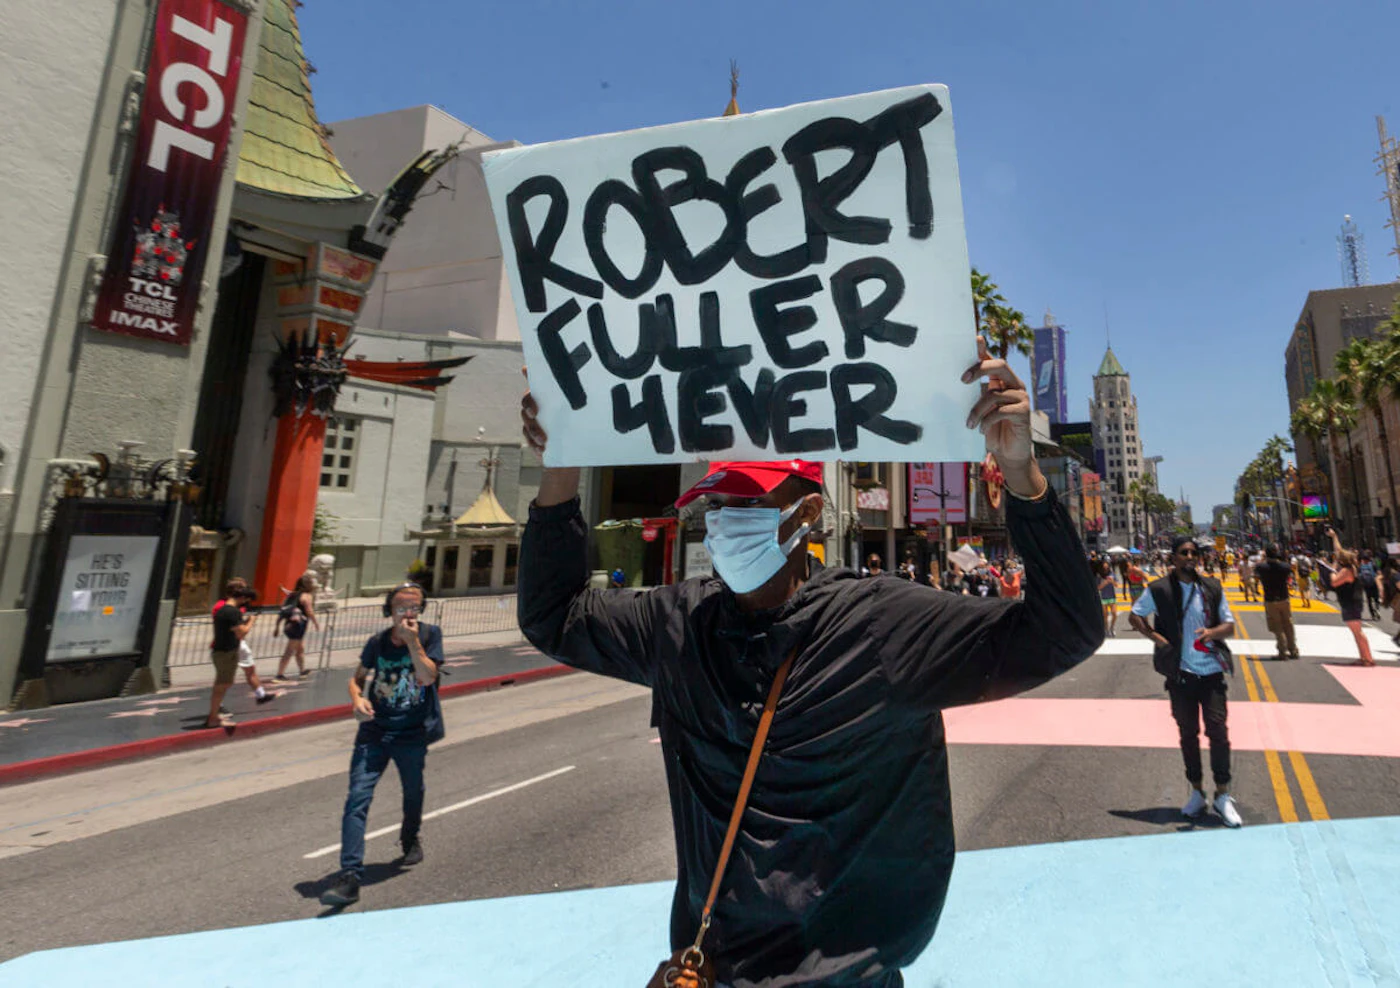 A demonstrator carries a sign reading: "Robert Fuller 4Ever" during an All Black Lives Matter march organized by black members of the LGBTQ community, in the Hollywood section of Los Angeles on Sunday, June 14, 2020. (AP Photo/Damian Dovarganes)